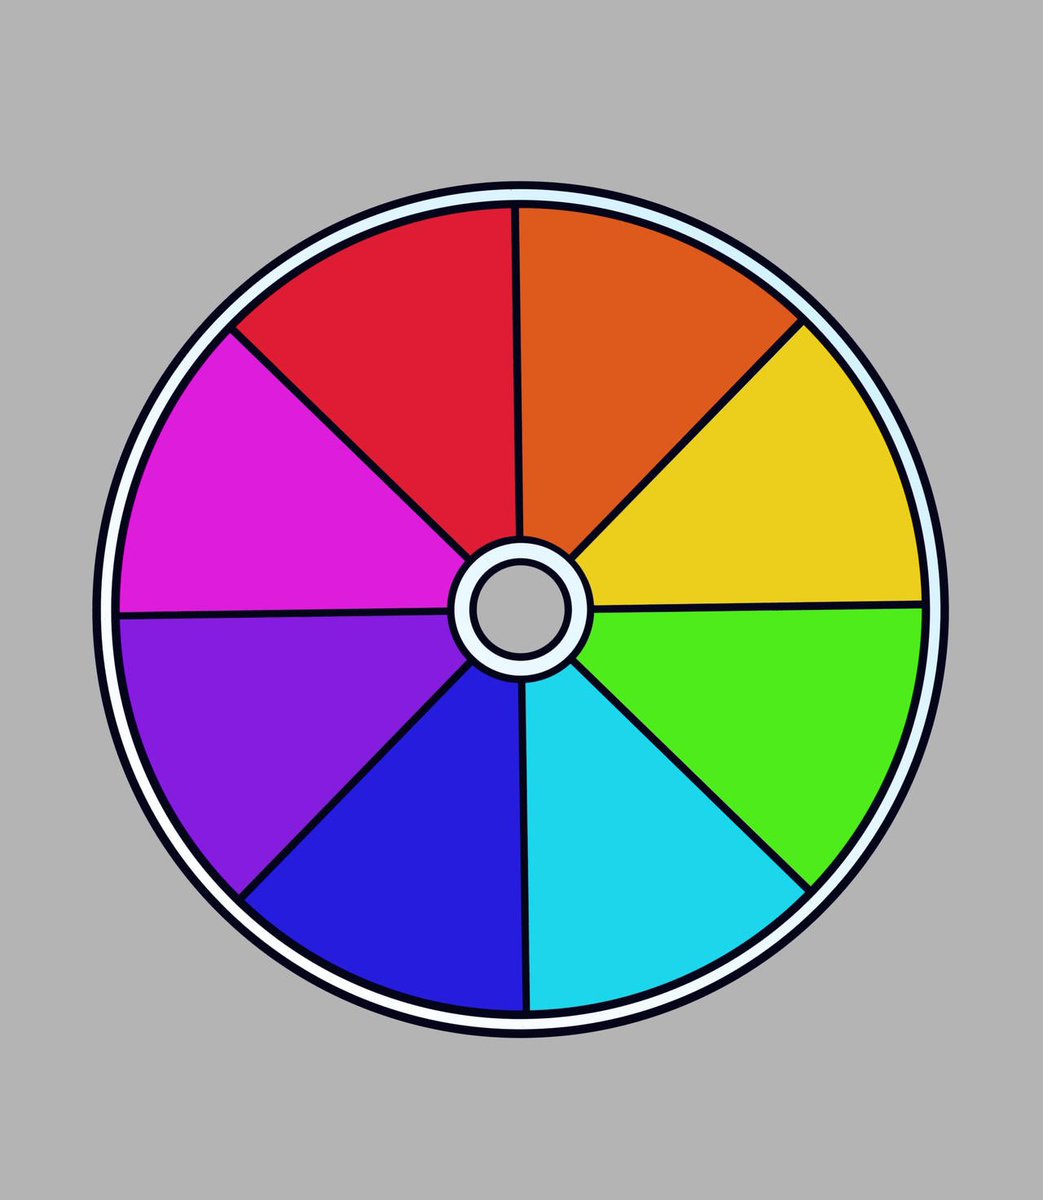 Lets try this again 
Red #Colorwheelchallenge #Colorwheel